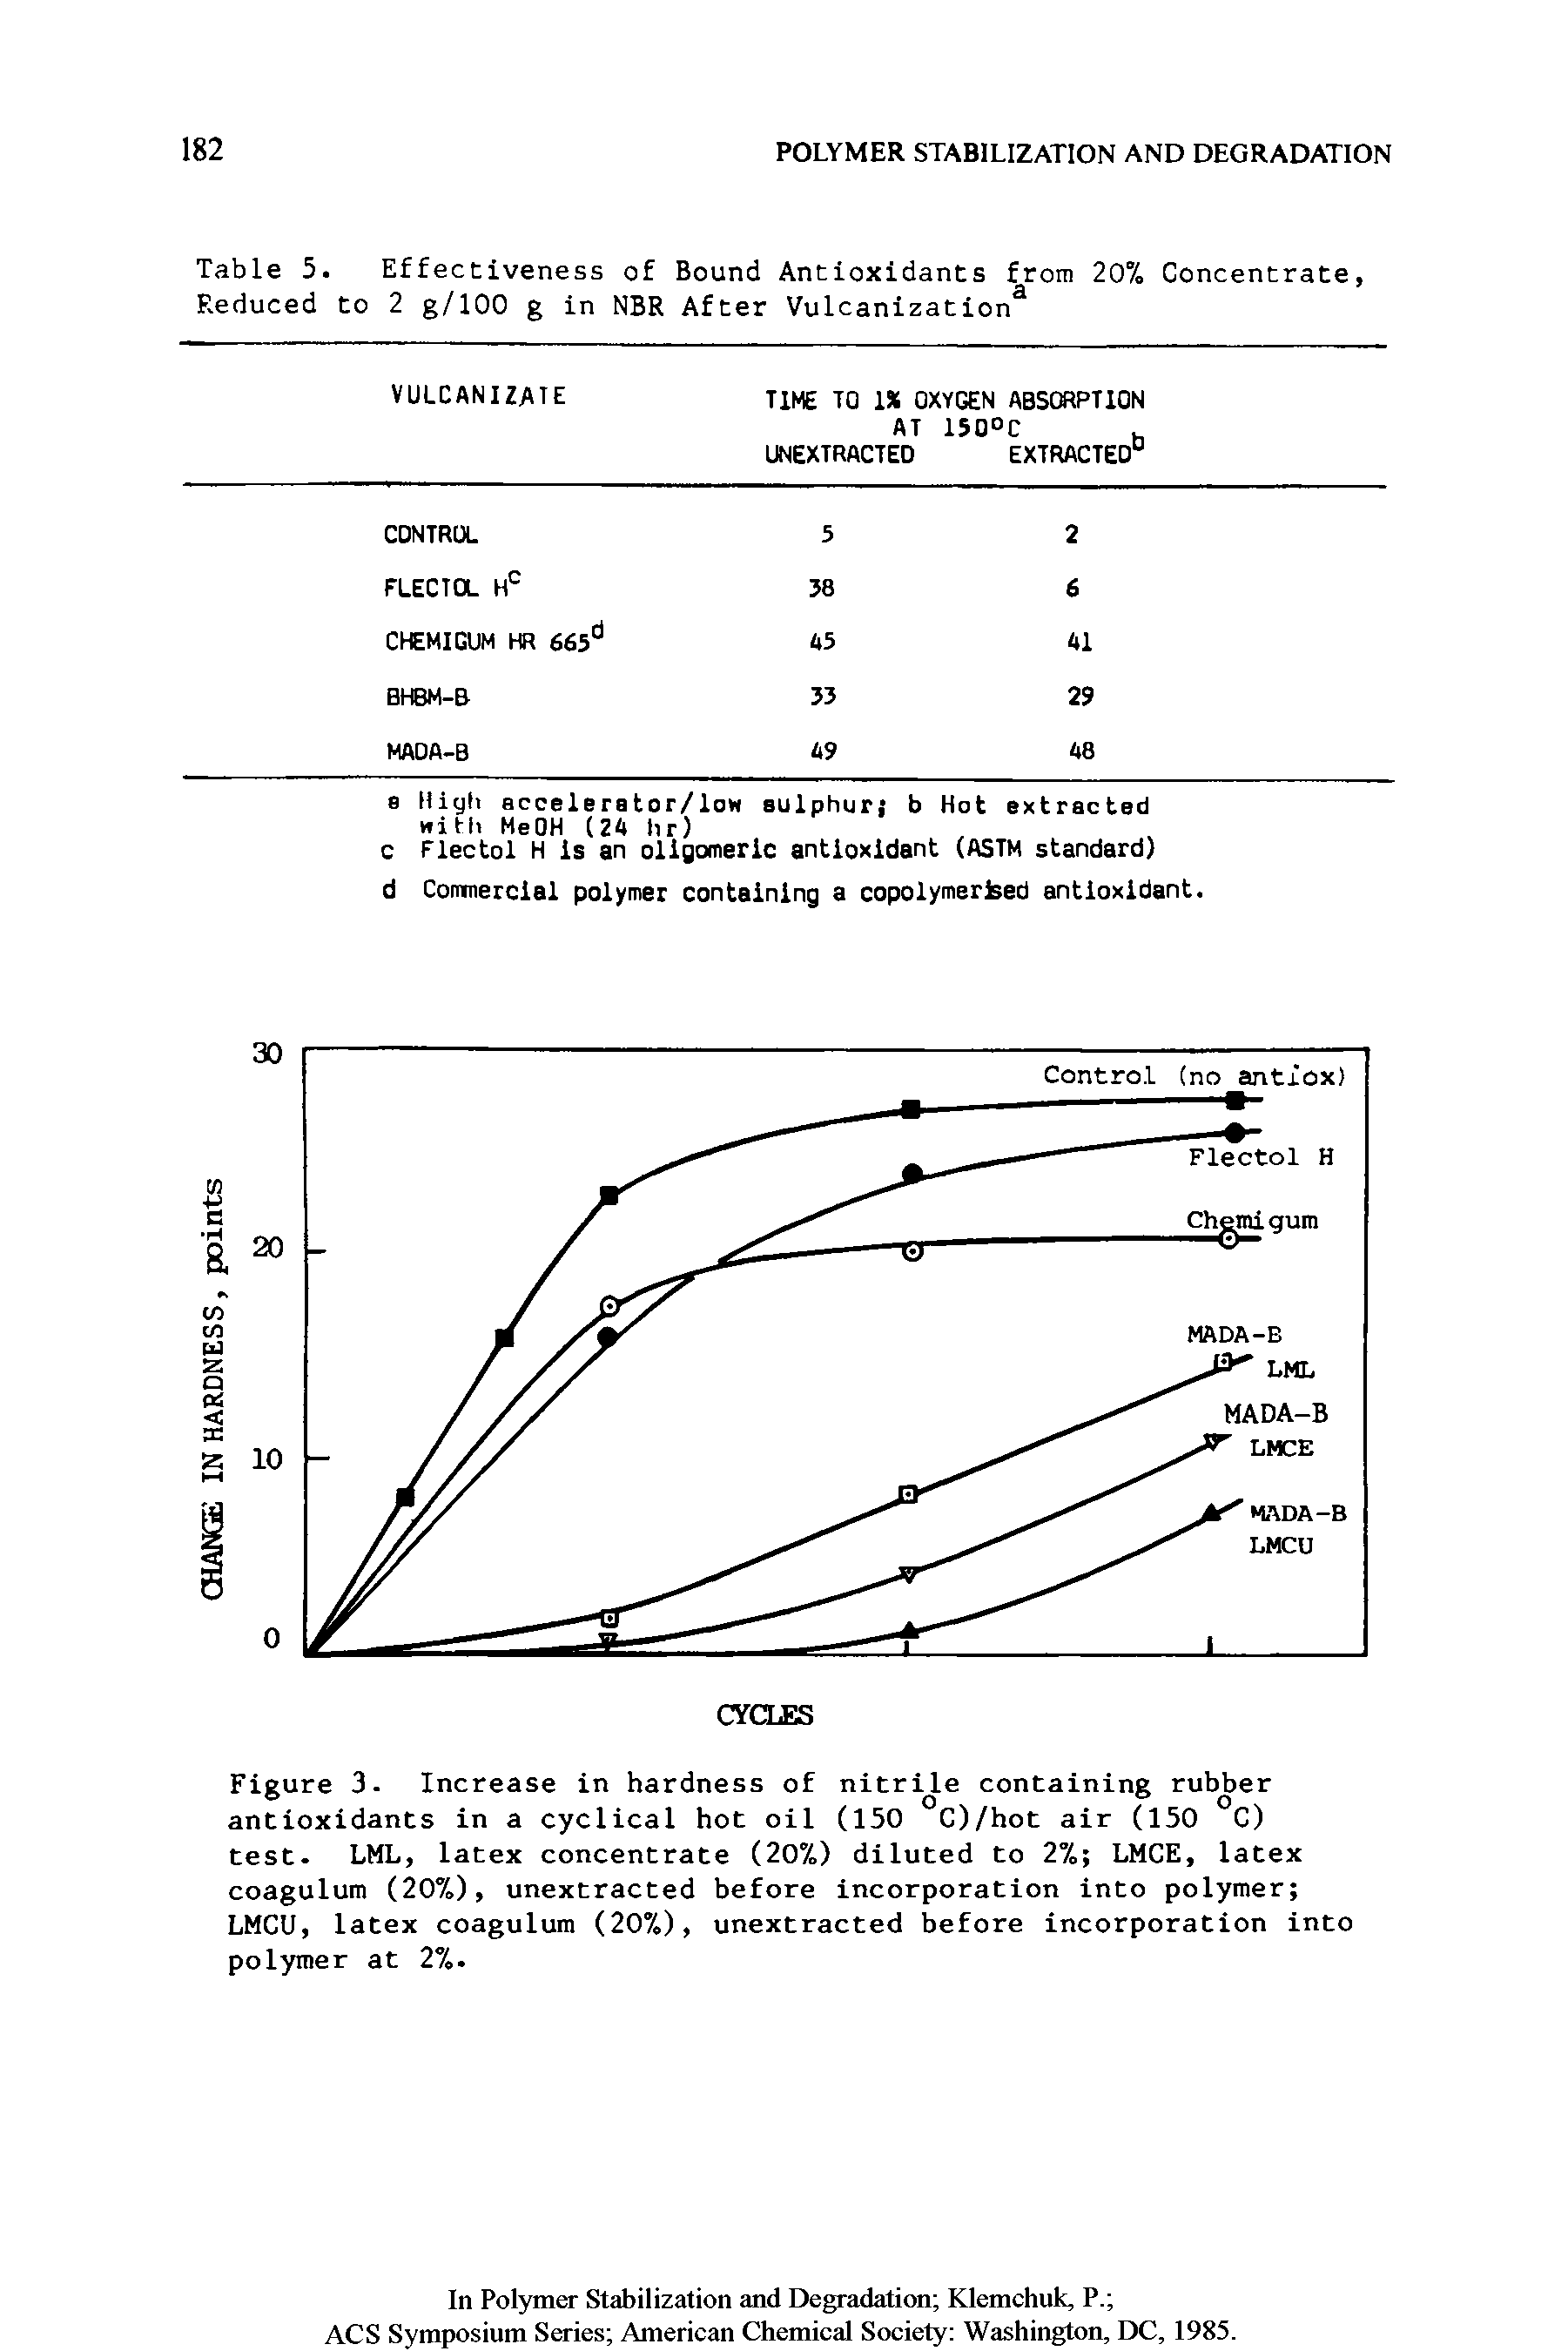 Figure 3- Increase in hardness of nitrile containing rubber antioxidants in a cyclical hot oil (150 C)/hot air (150 C) test. LML, latex concentrate (20%) diluted to 2% LMCE, latex coagulum (207 ), unextracted before incorporation into polymer LMCU, latex coagulum (20%,), unextracted before incorporation into polymer at 2%.